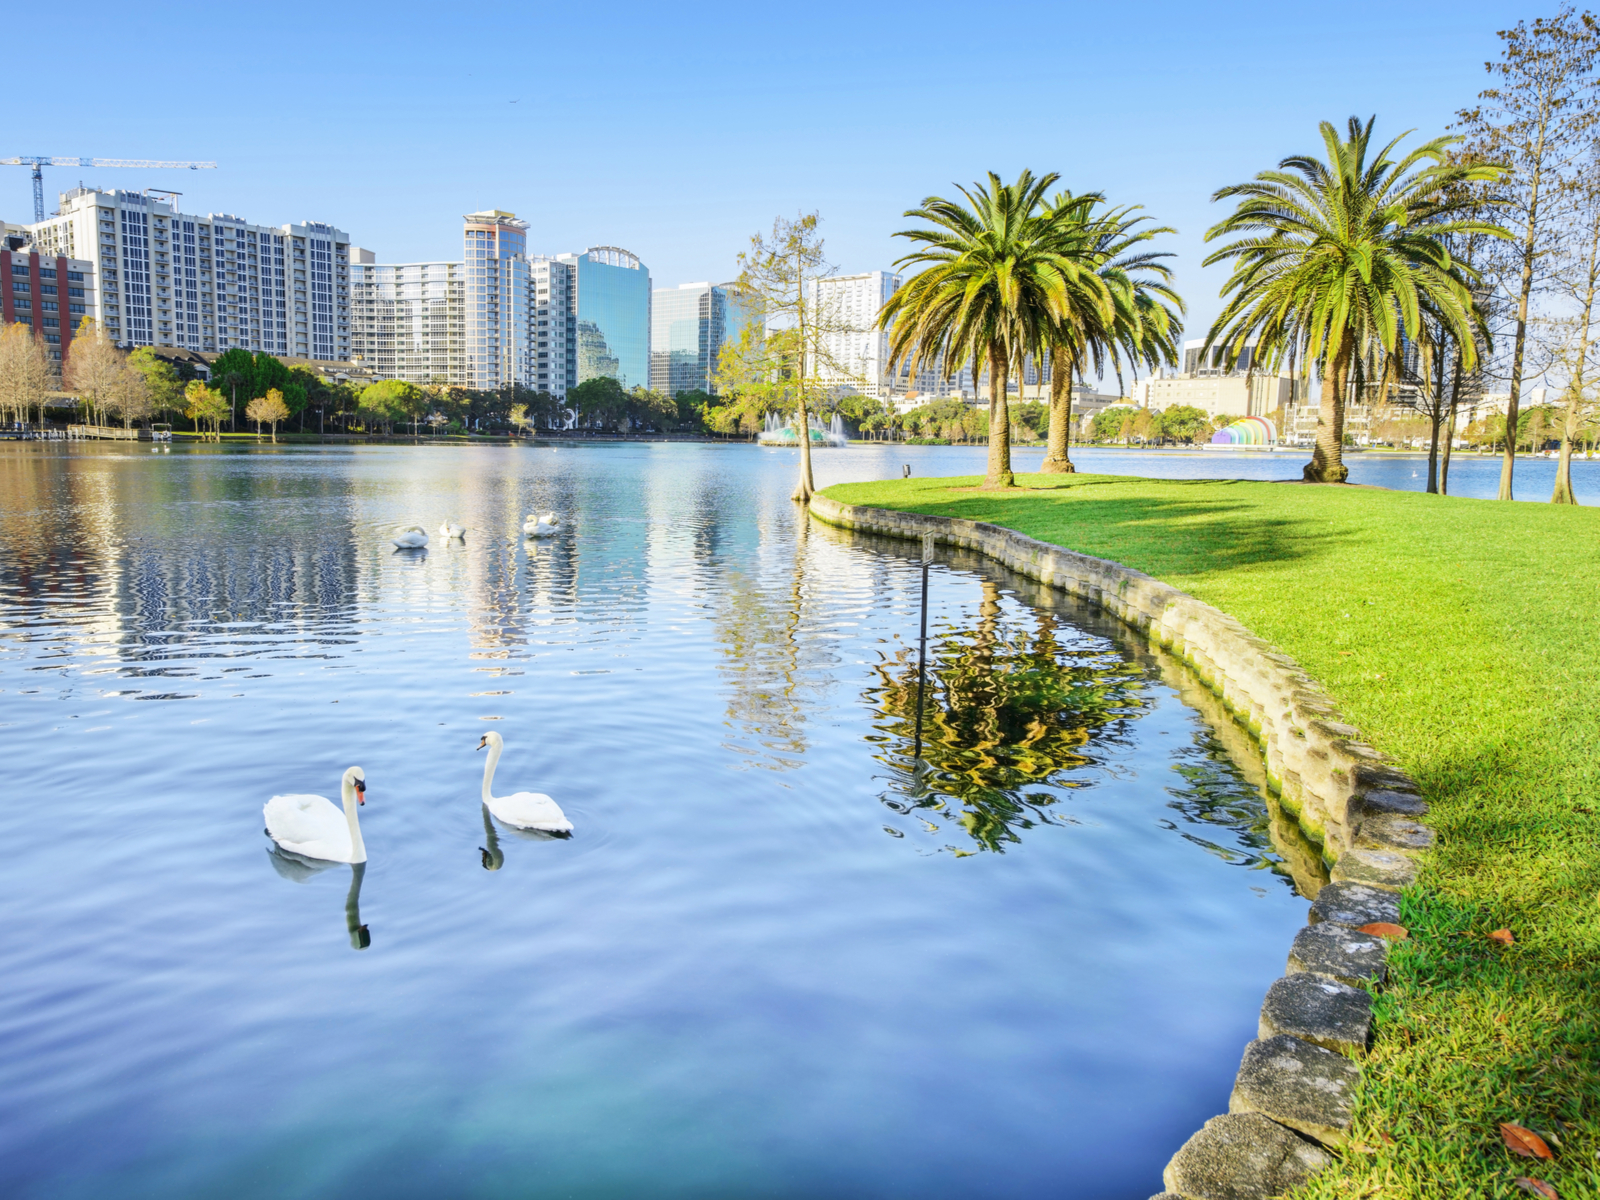 Lake Eola Park in Orlando, one of the best places to visit in Orlando